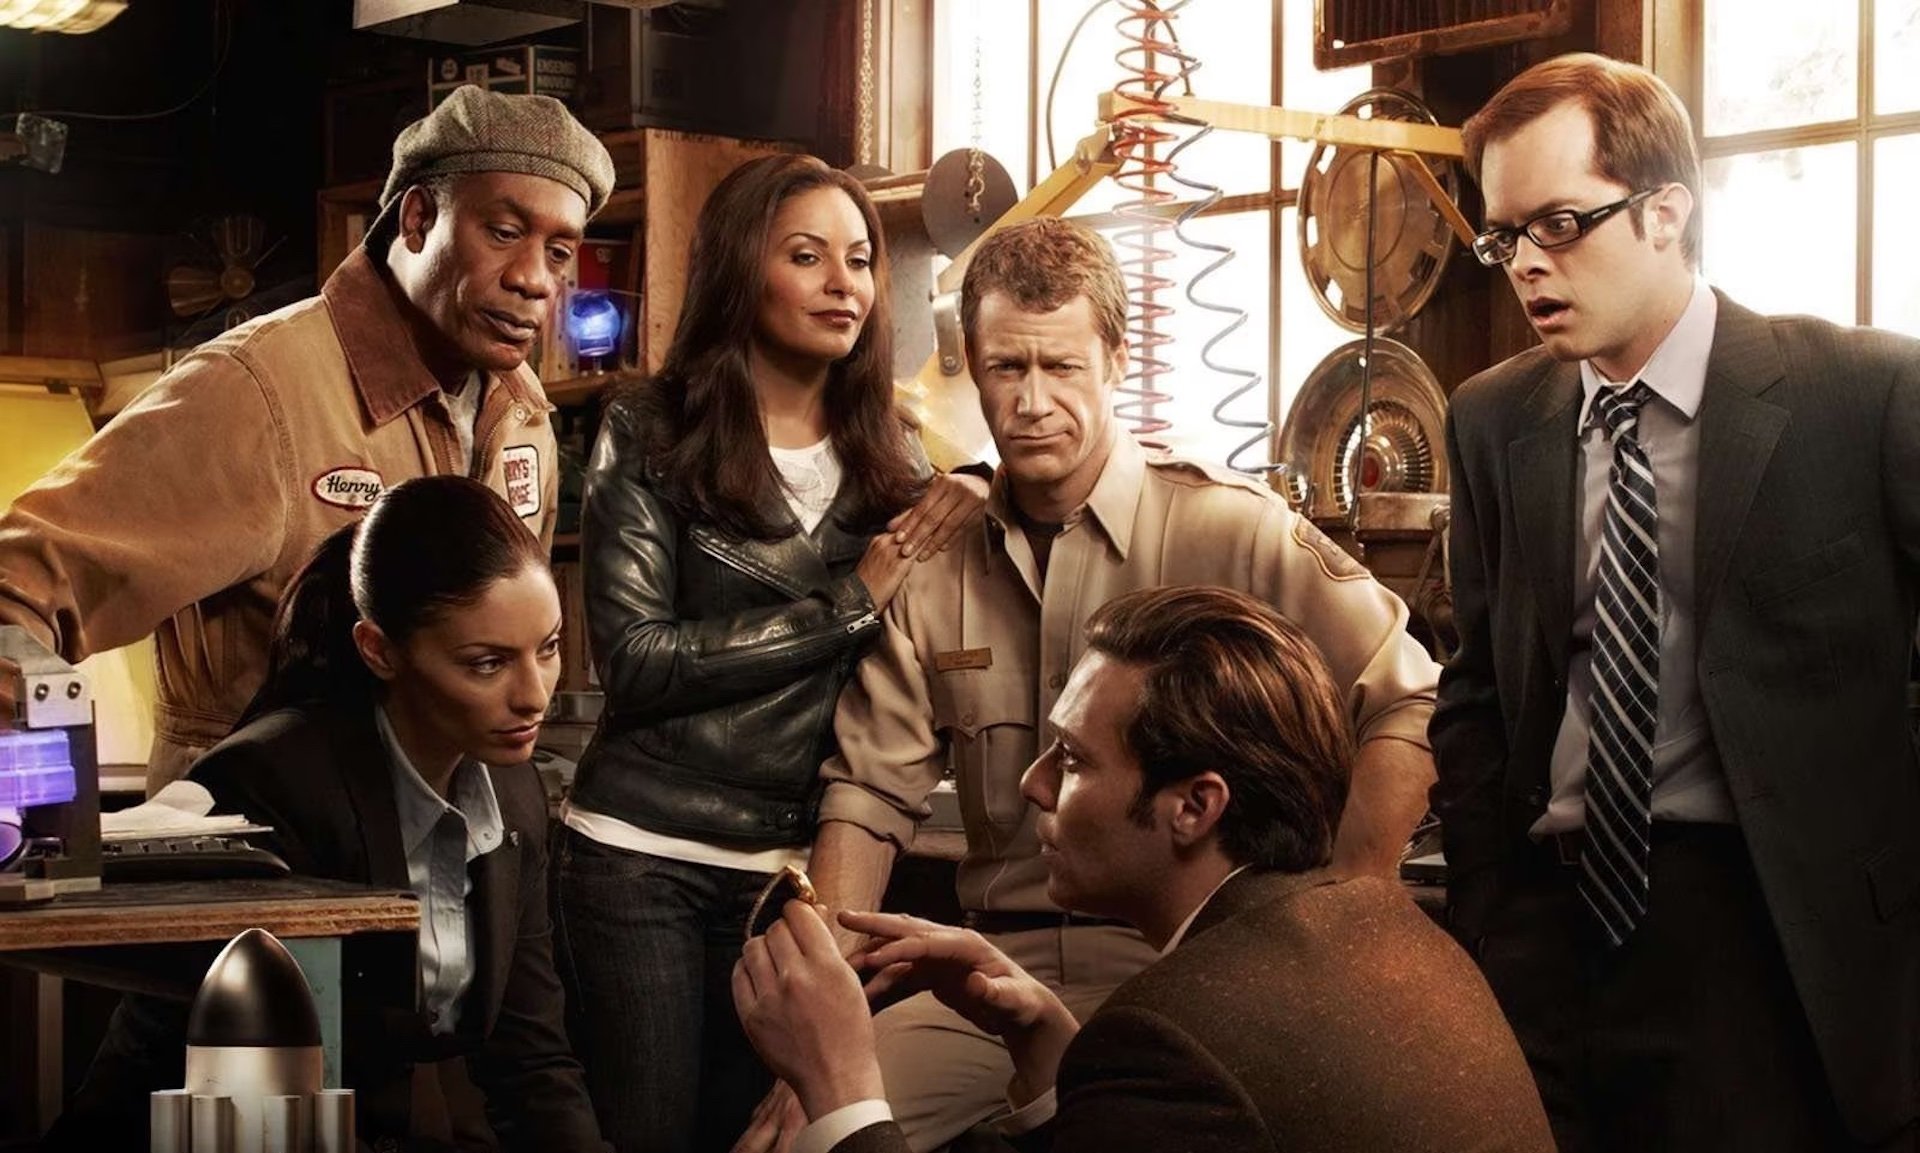 The cast of 'Eureka' looking at a watch in a promo photo; Finding Your Lane With 'The Flash' Showrunner Eric Wallace